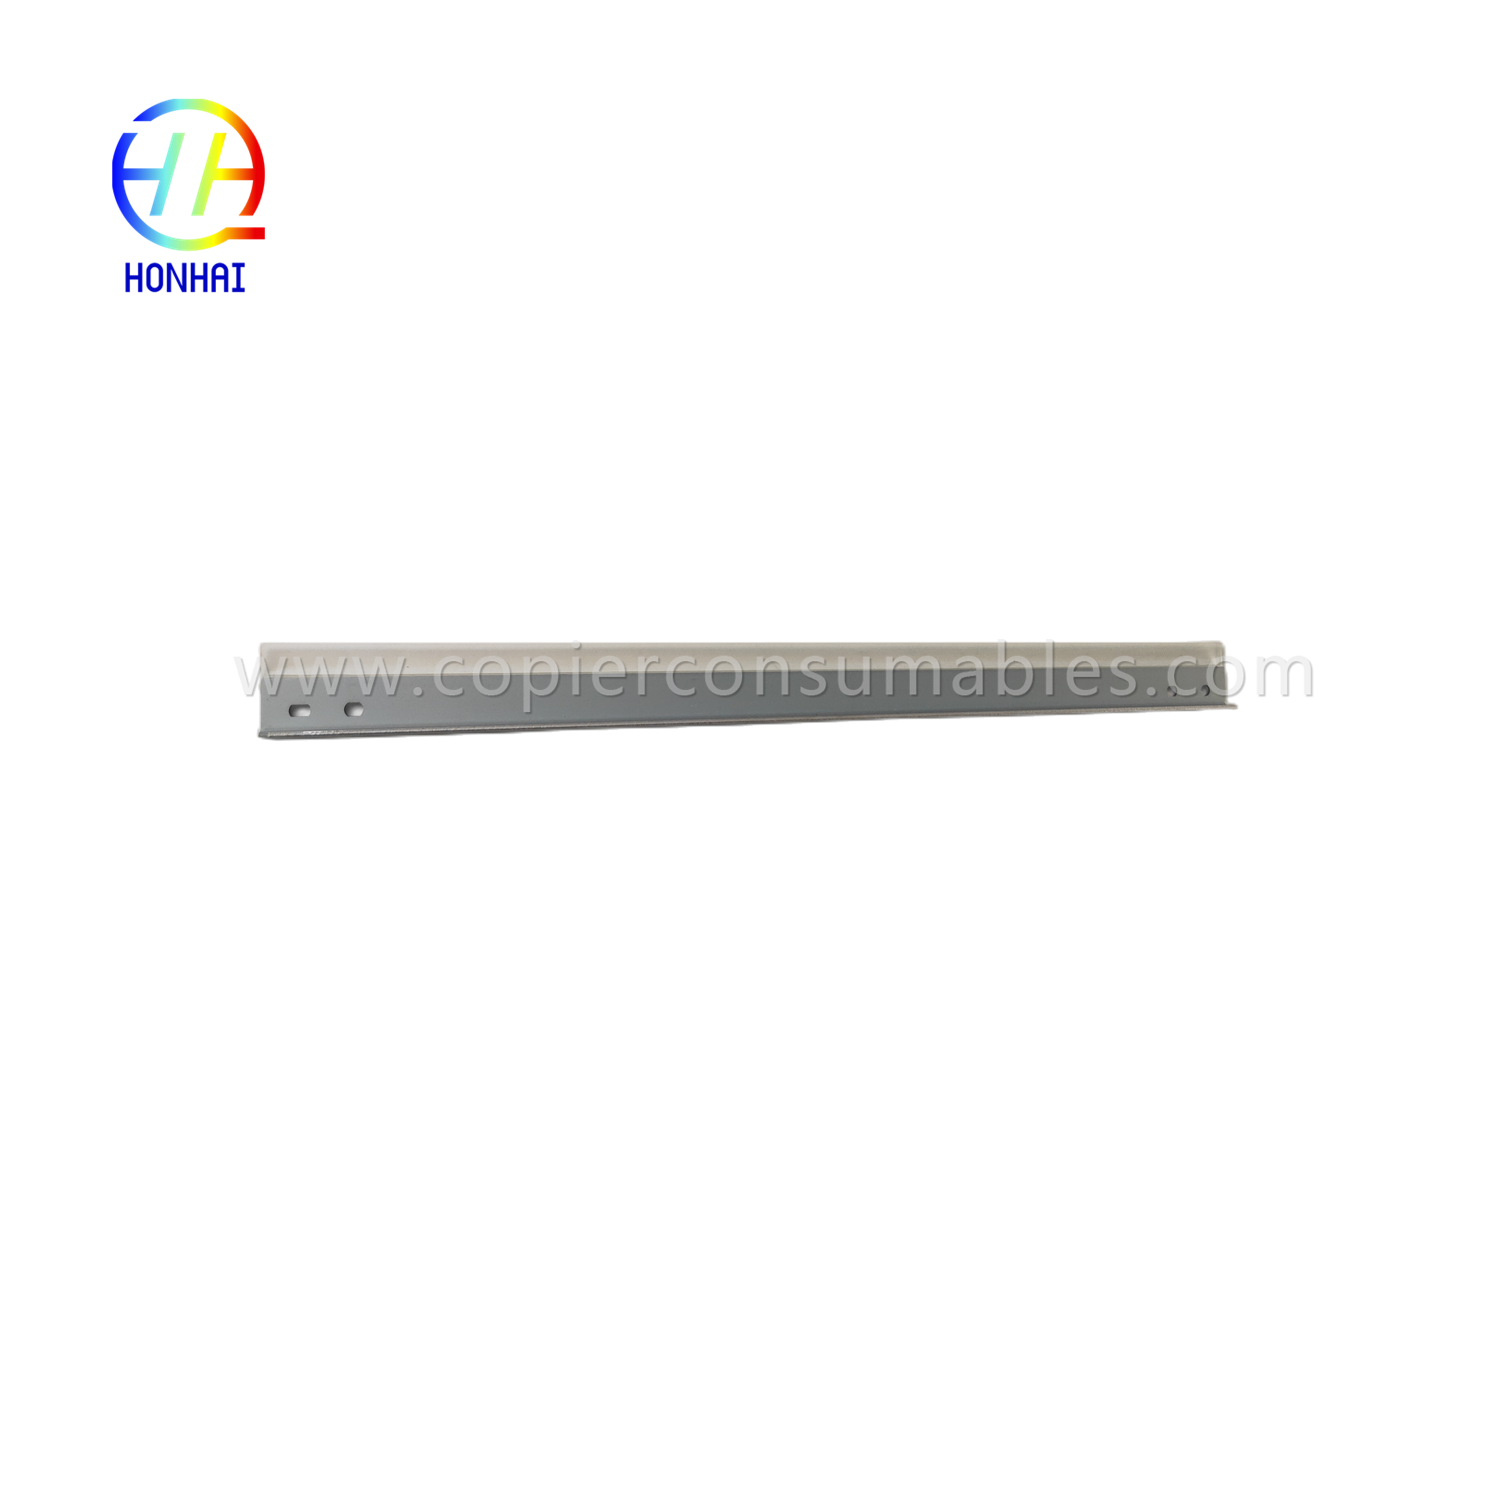 https://c585.goodo.net/drum-cleaning-blade-for-ricoh-mp2501-2015-2001-2001l-2501l-ad04-2083-ad042083-ngwaahịa/